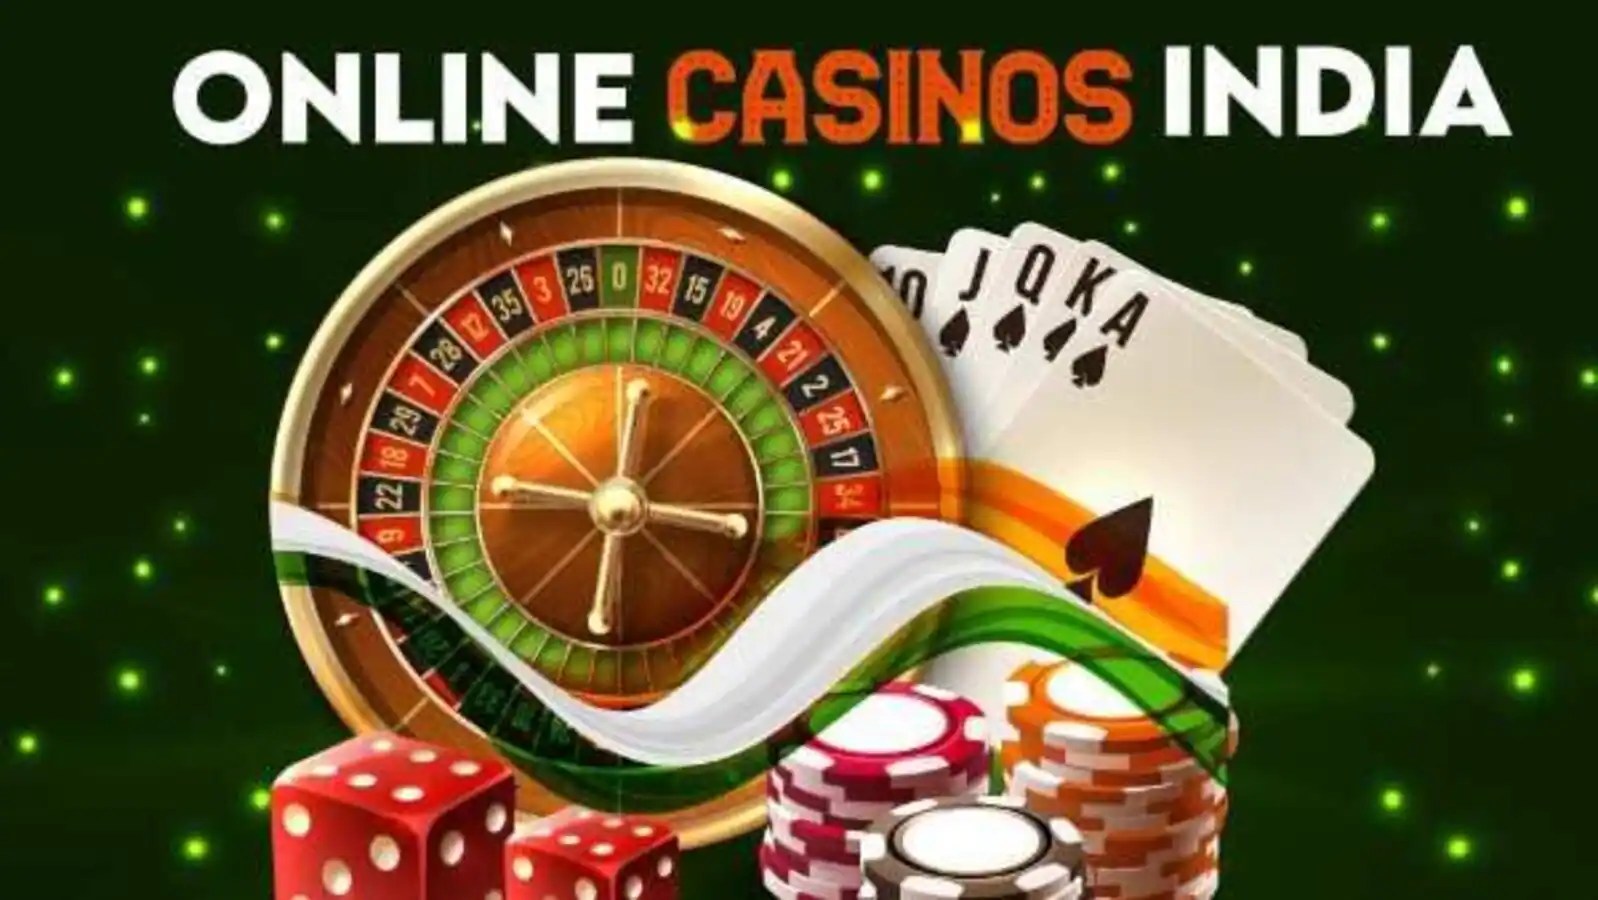 Looking For The Best Casino Site In India? Look No Further Than Marvelbet